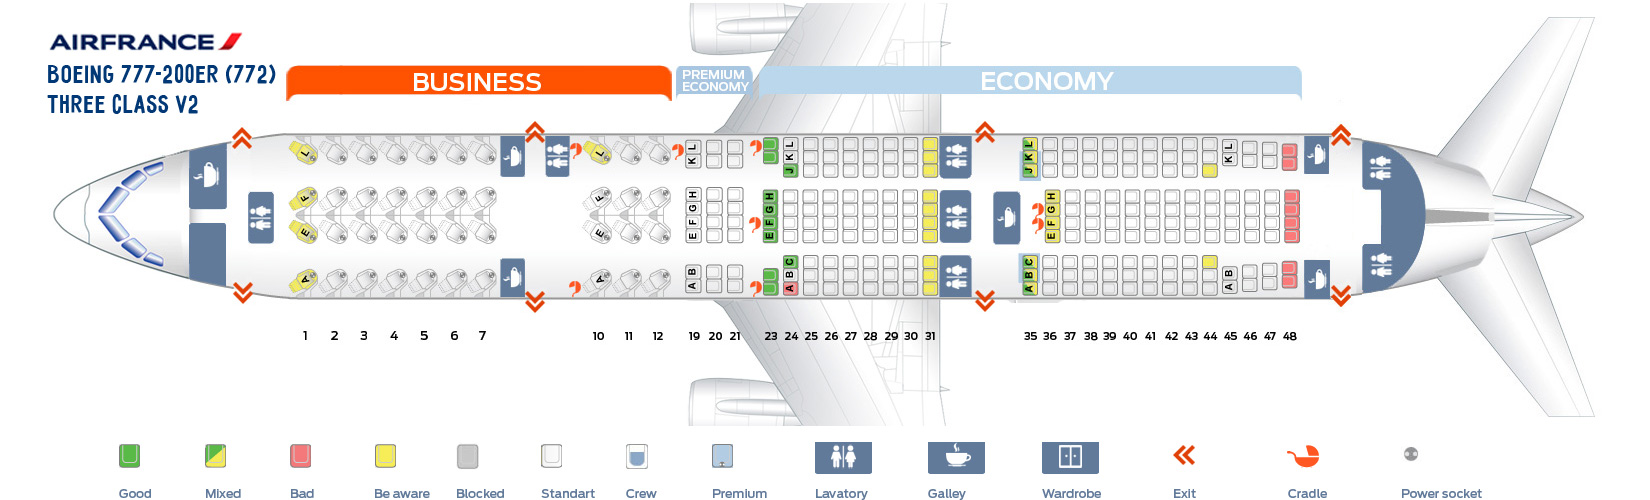 air france seat assignment policy